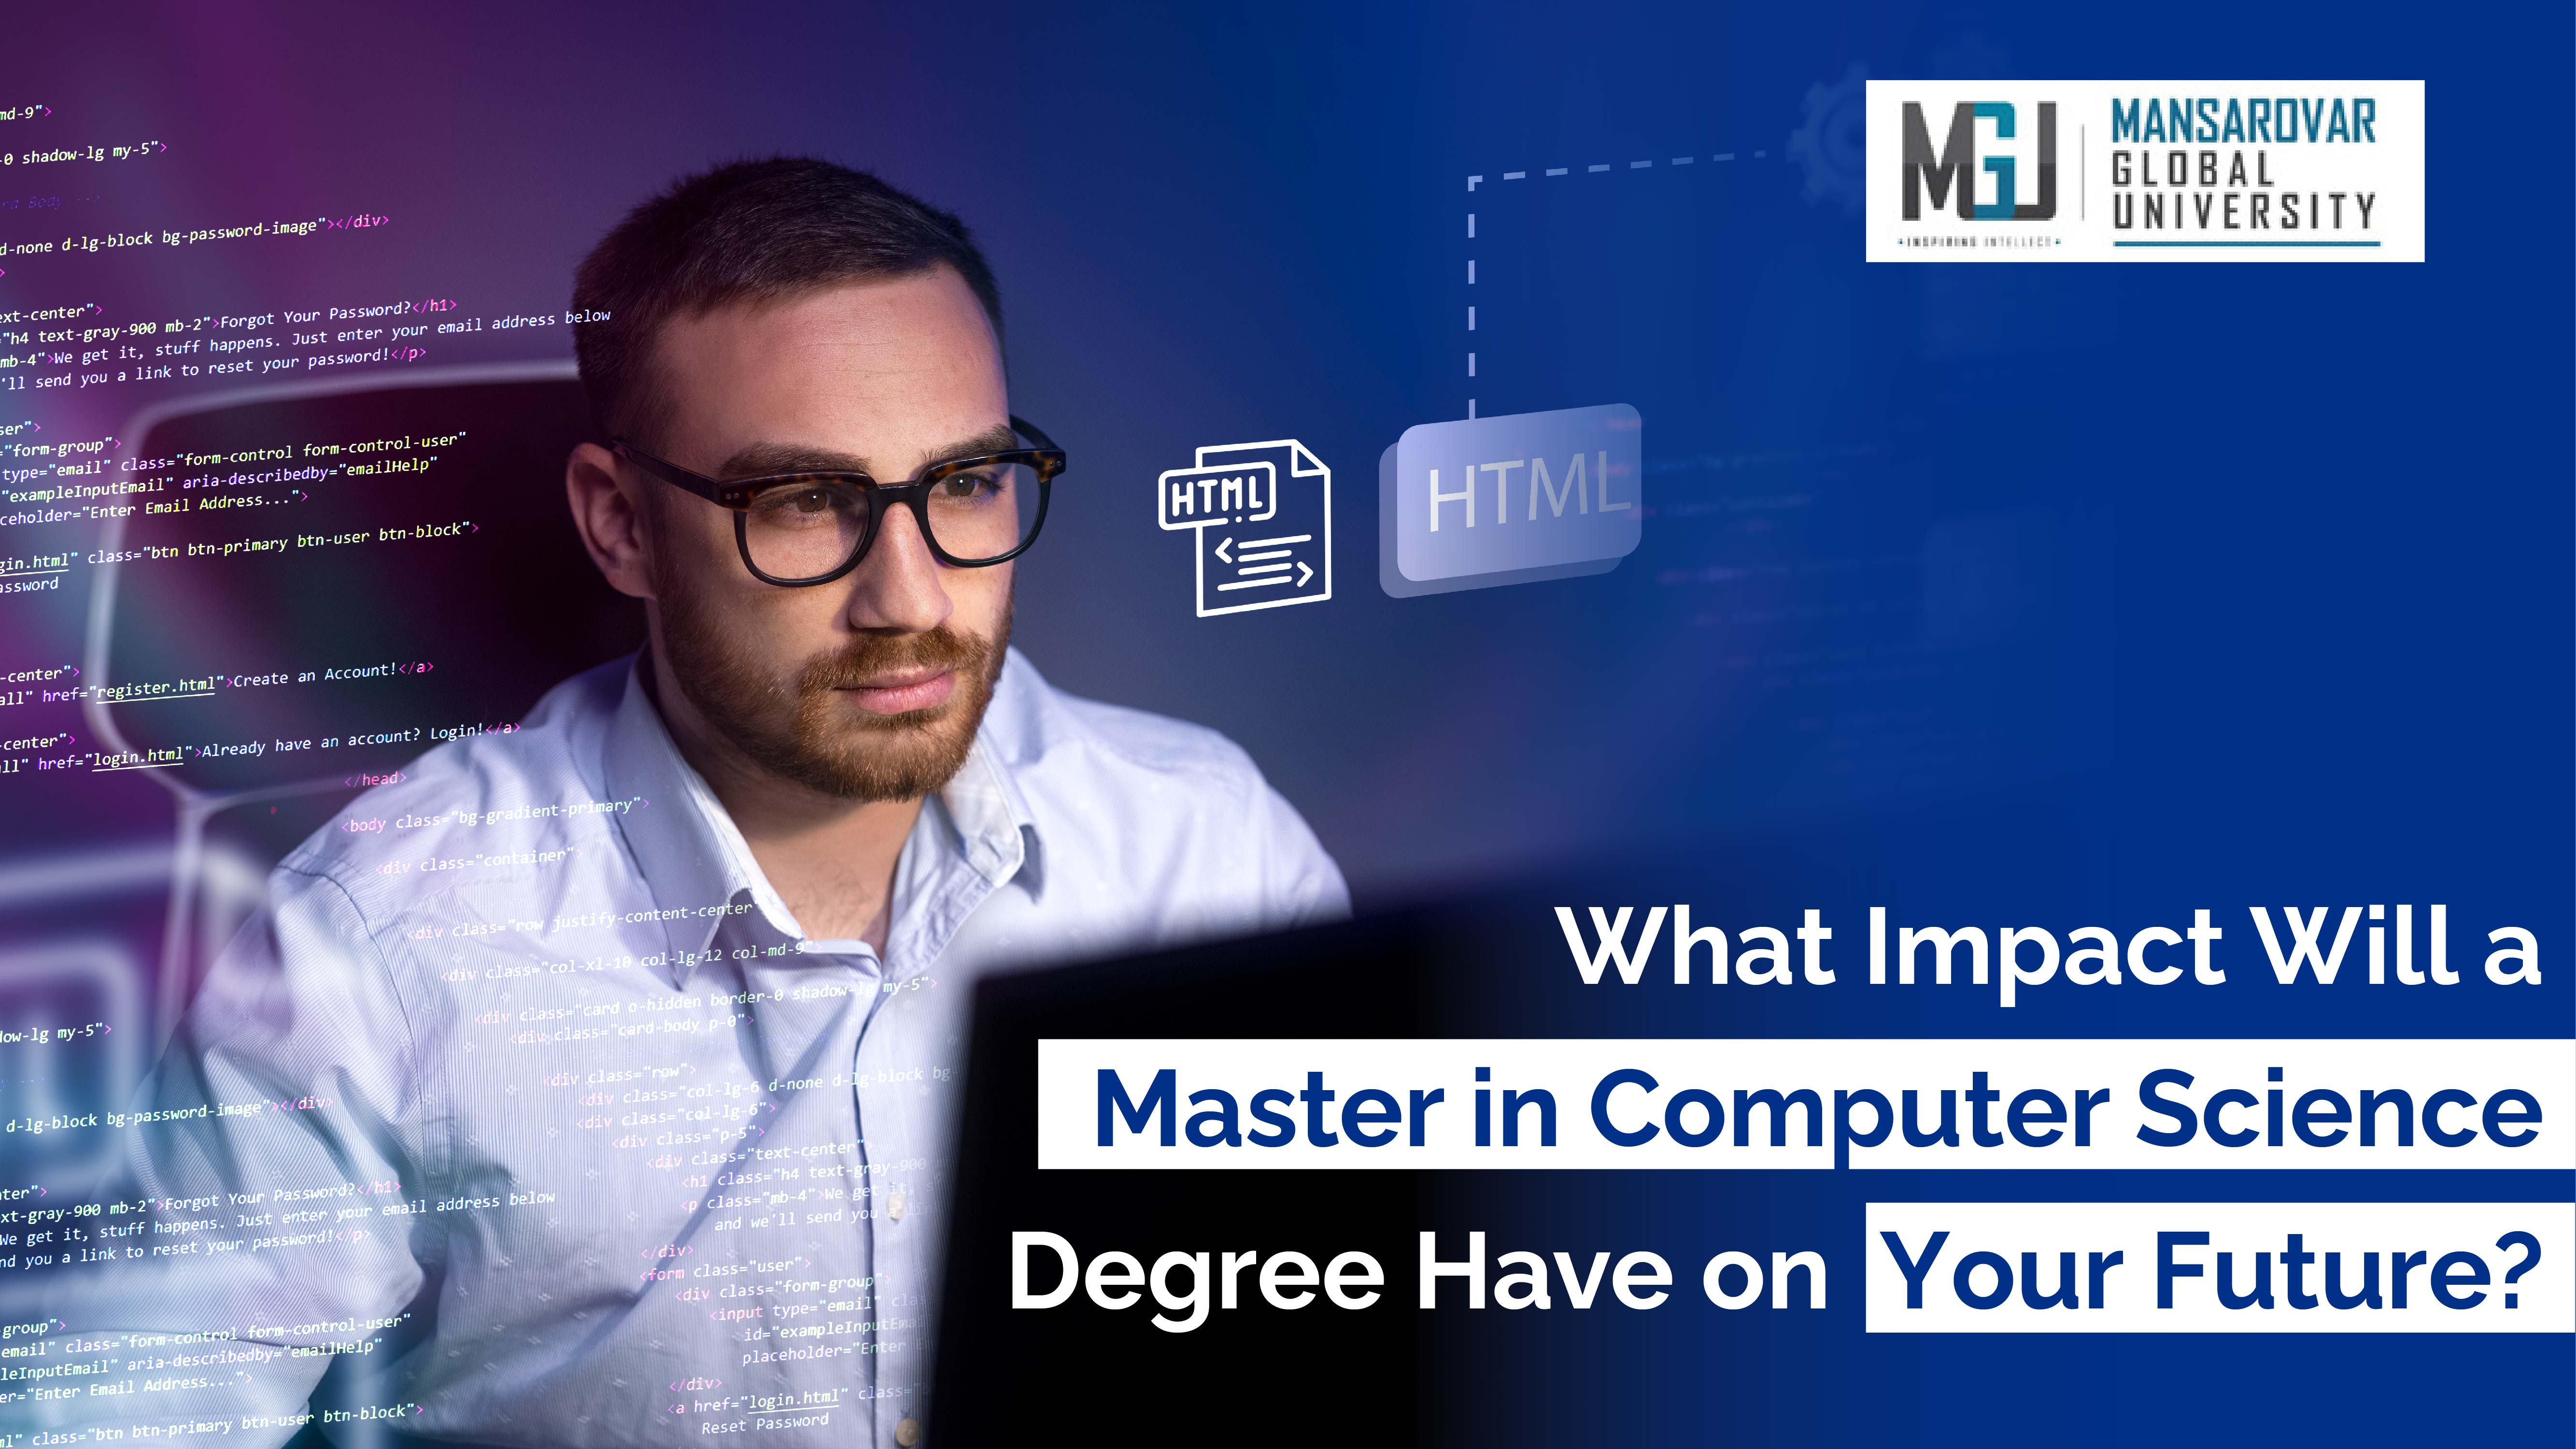  Master in Computer Science Degree